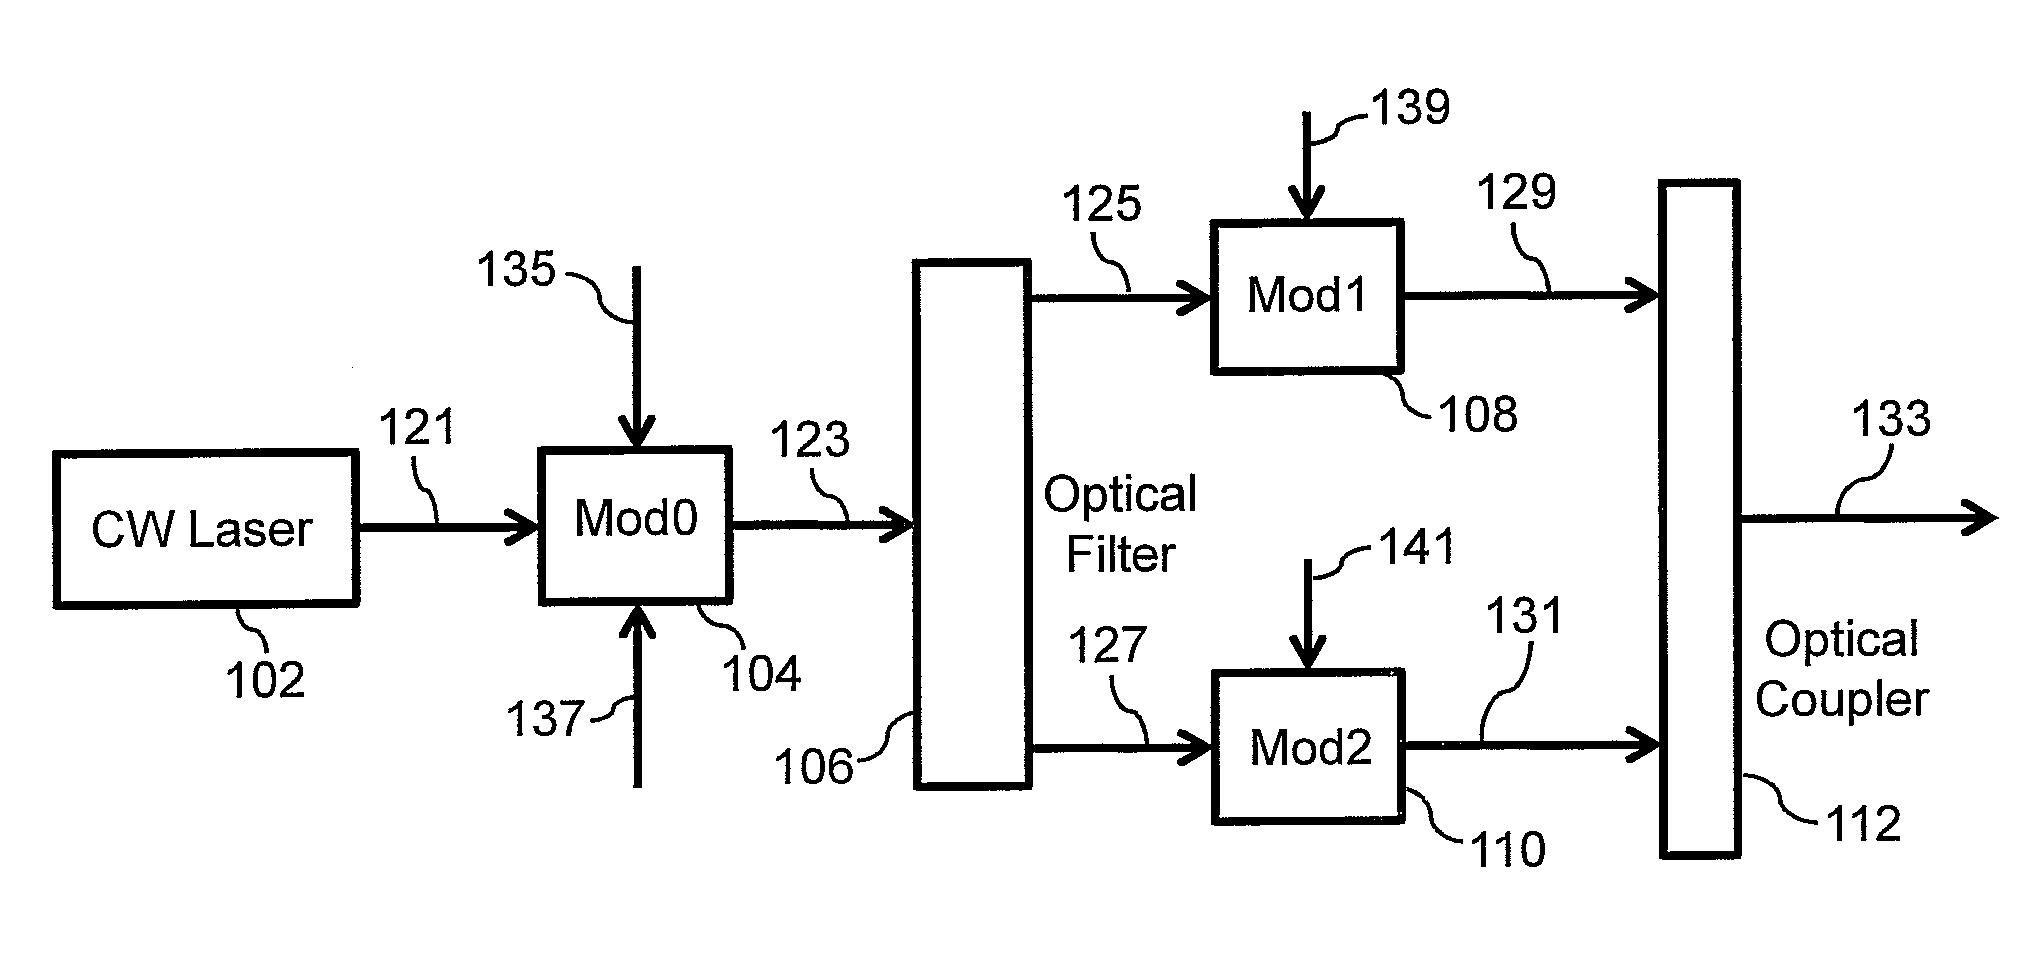 High Bit Rate Packet Generation with High Spectral Efficiency in an Optical Network